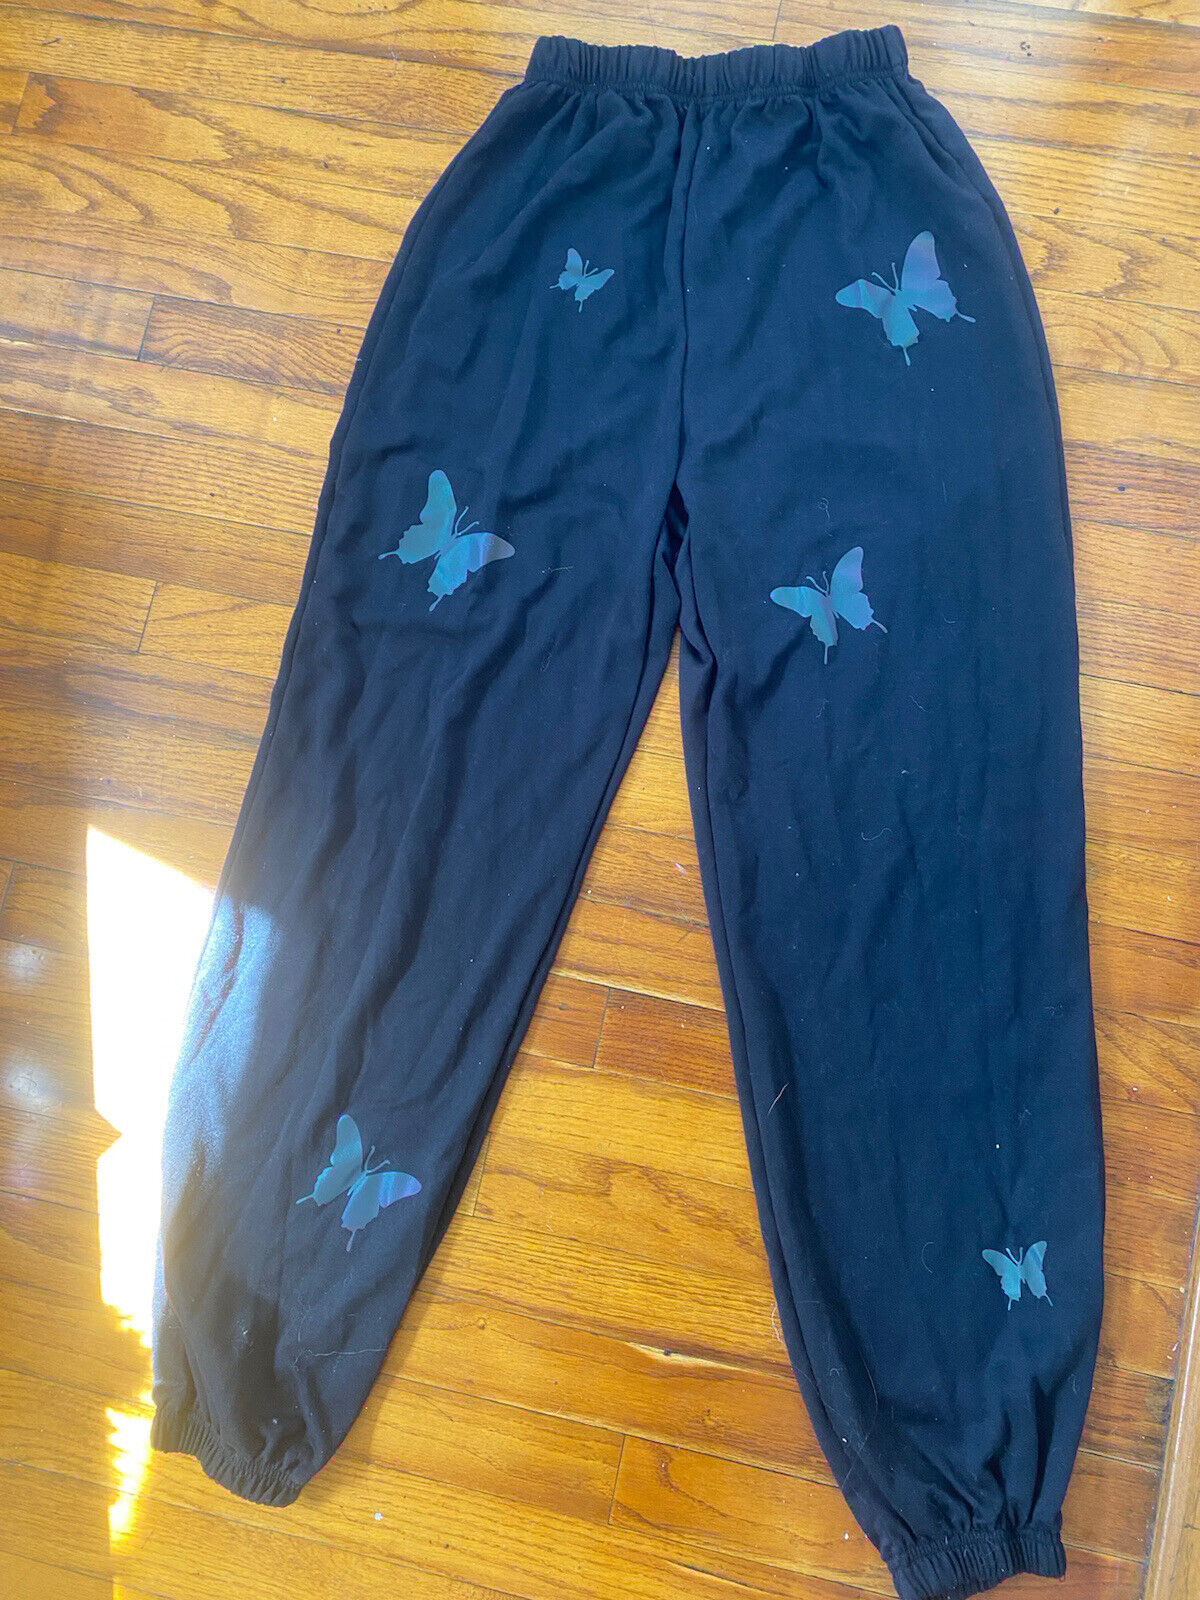 Butterfly Sweatpants - Unbranded - Size Small